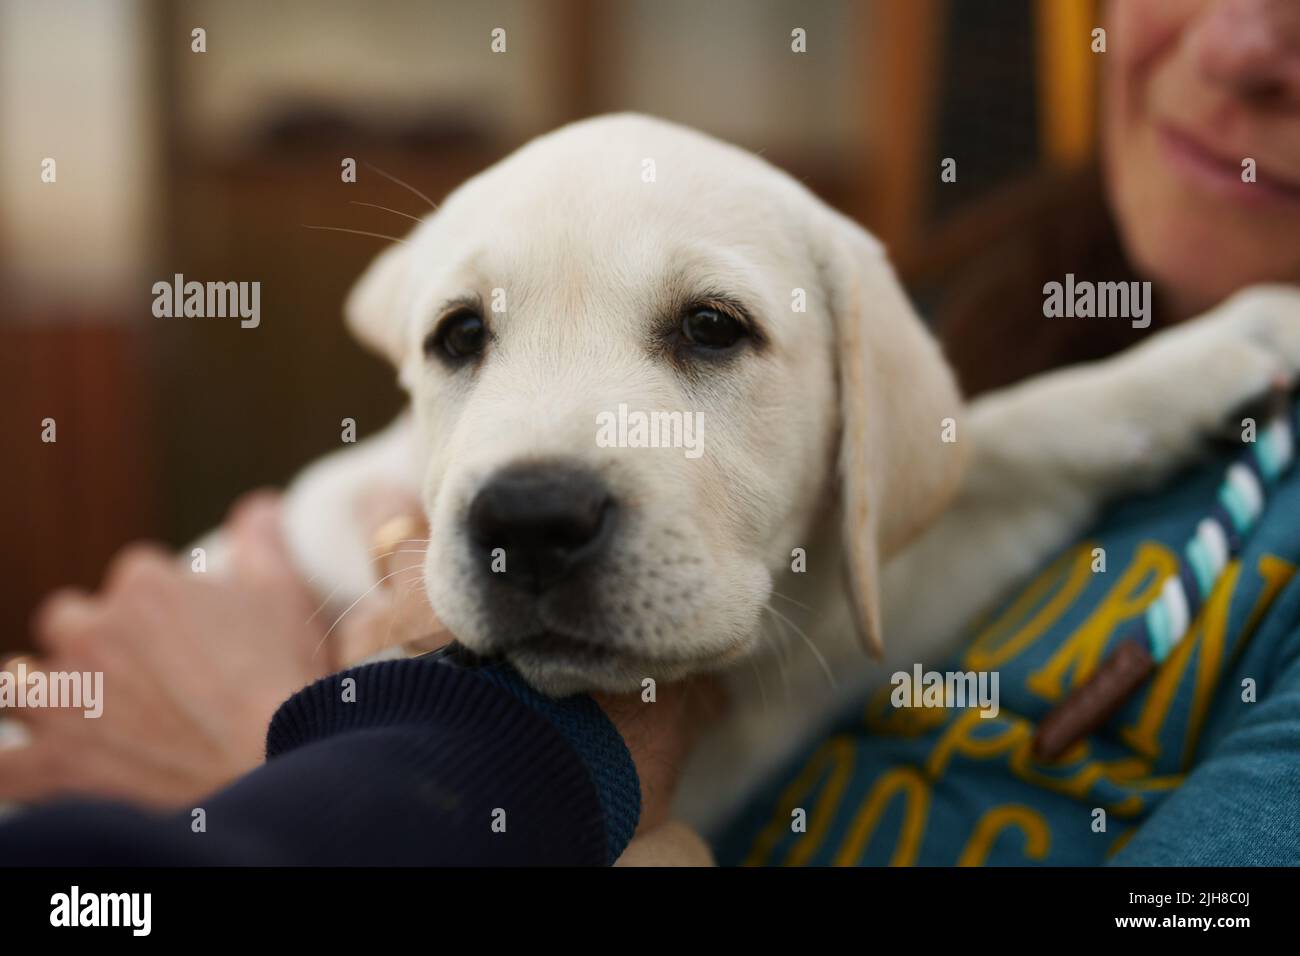 Cute little blond puppy relaxing on its owners lap in a close up head shot indoors at home Stock Photo